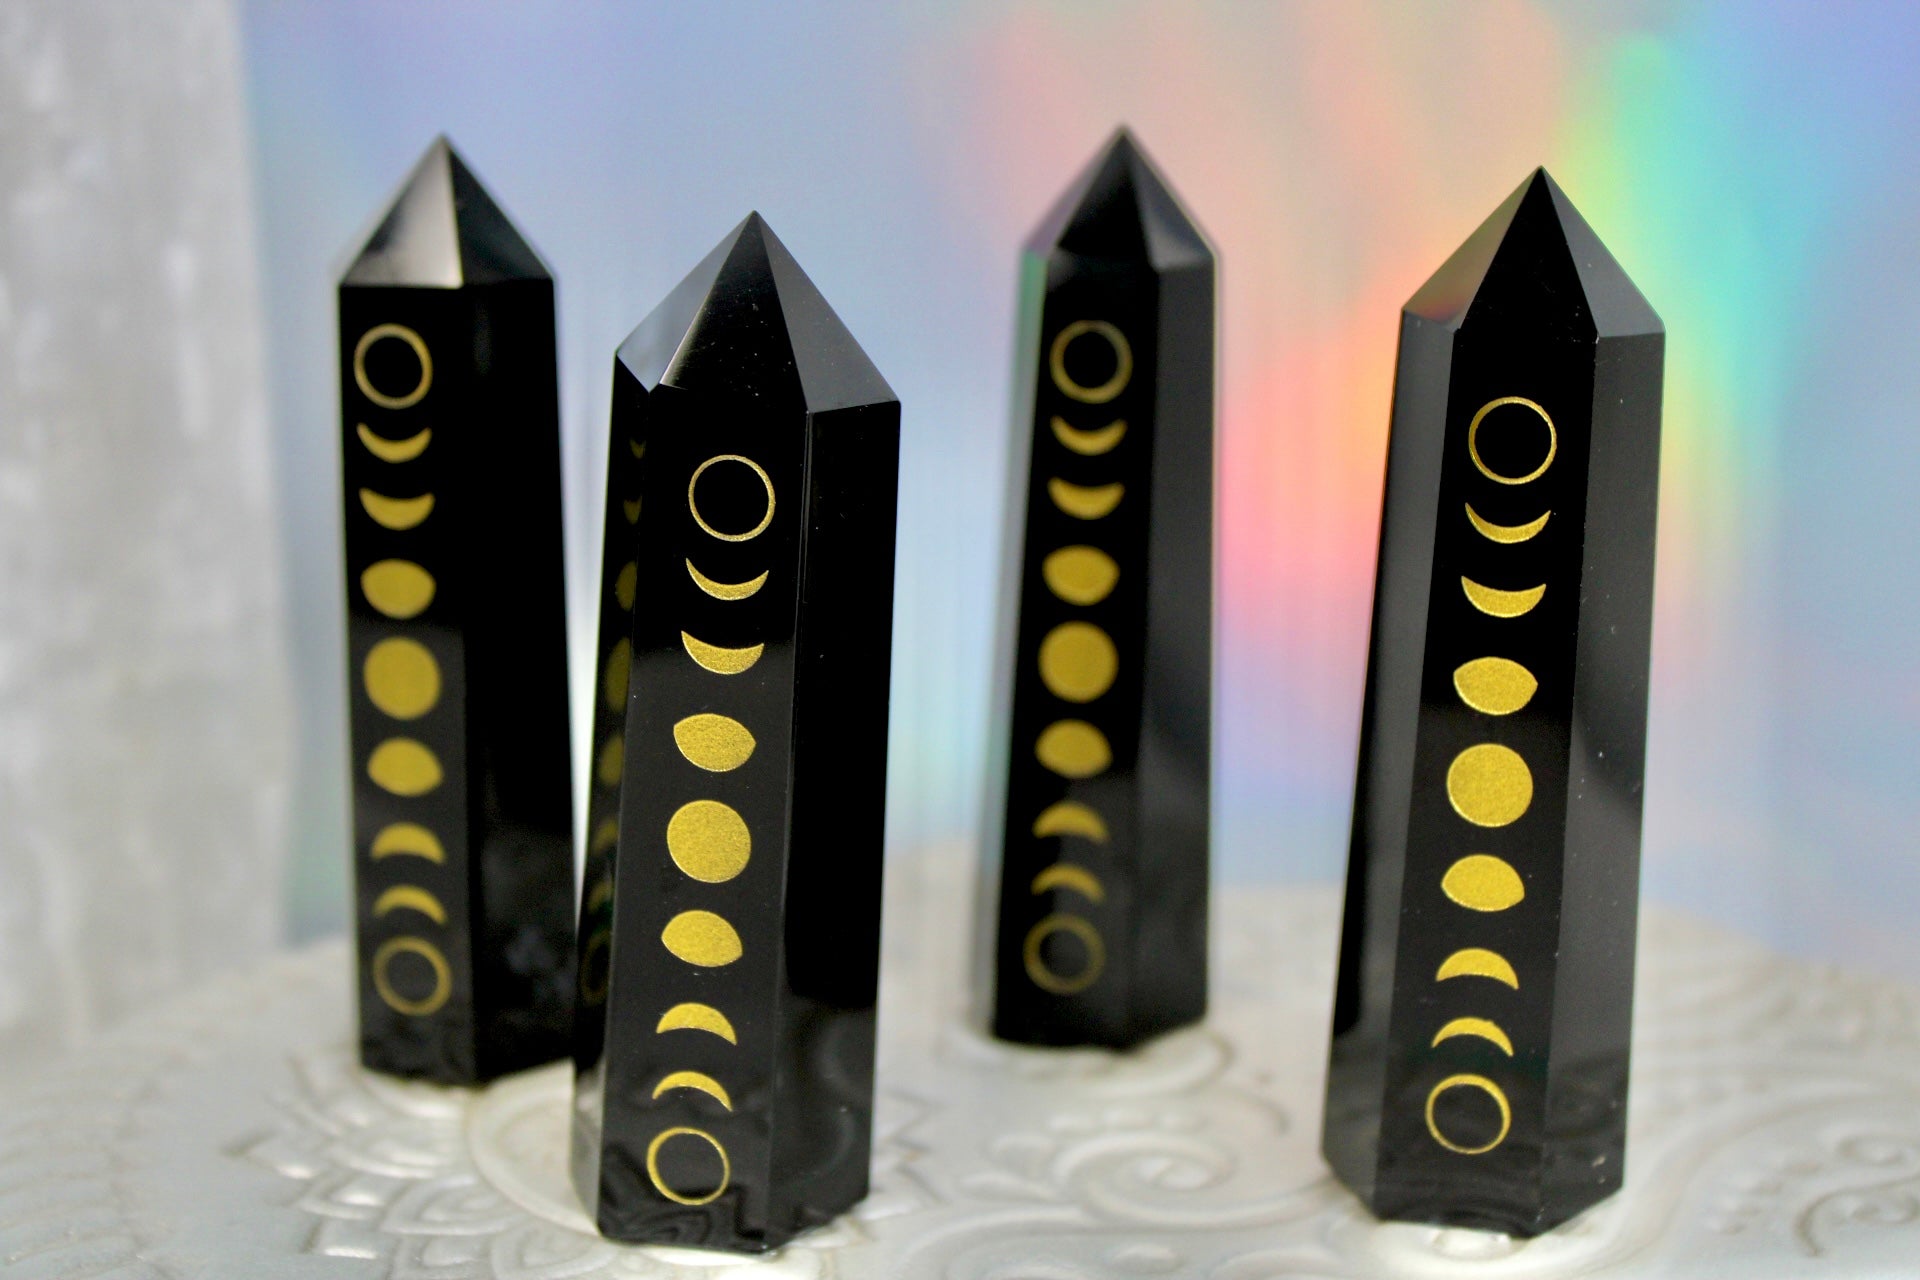 Black Obsidian Crystal Point with Moon Phases Carving